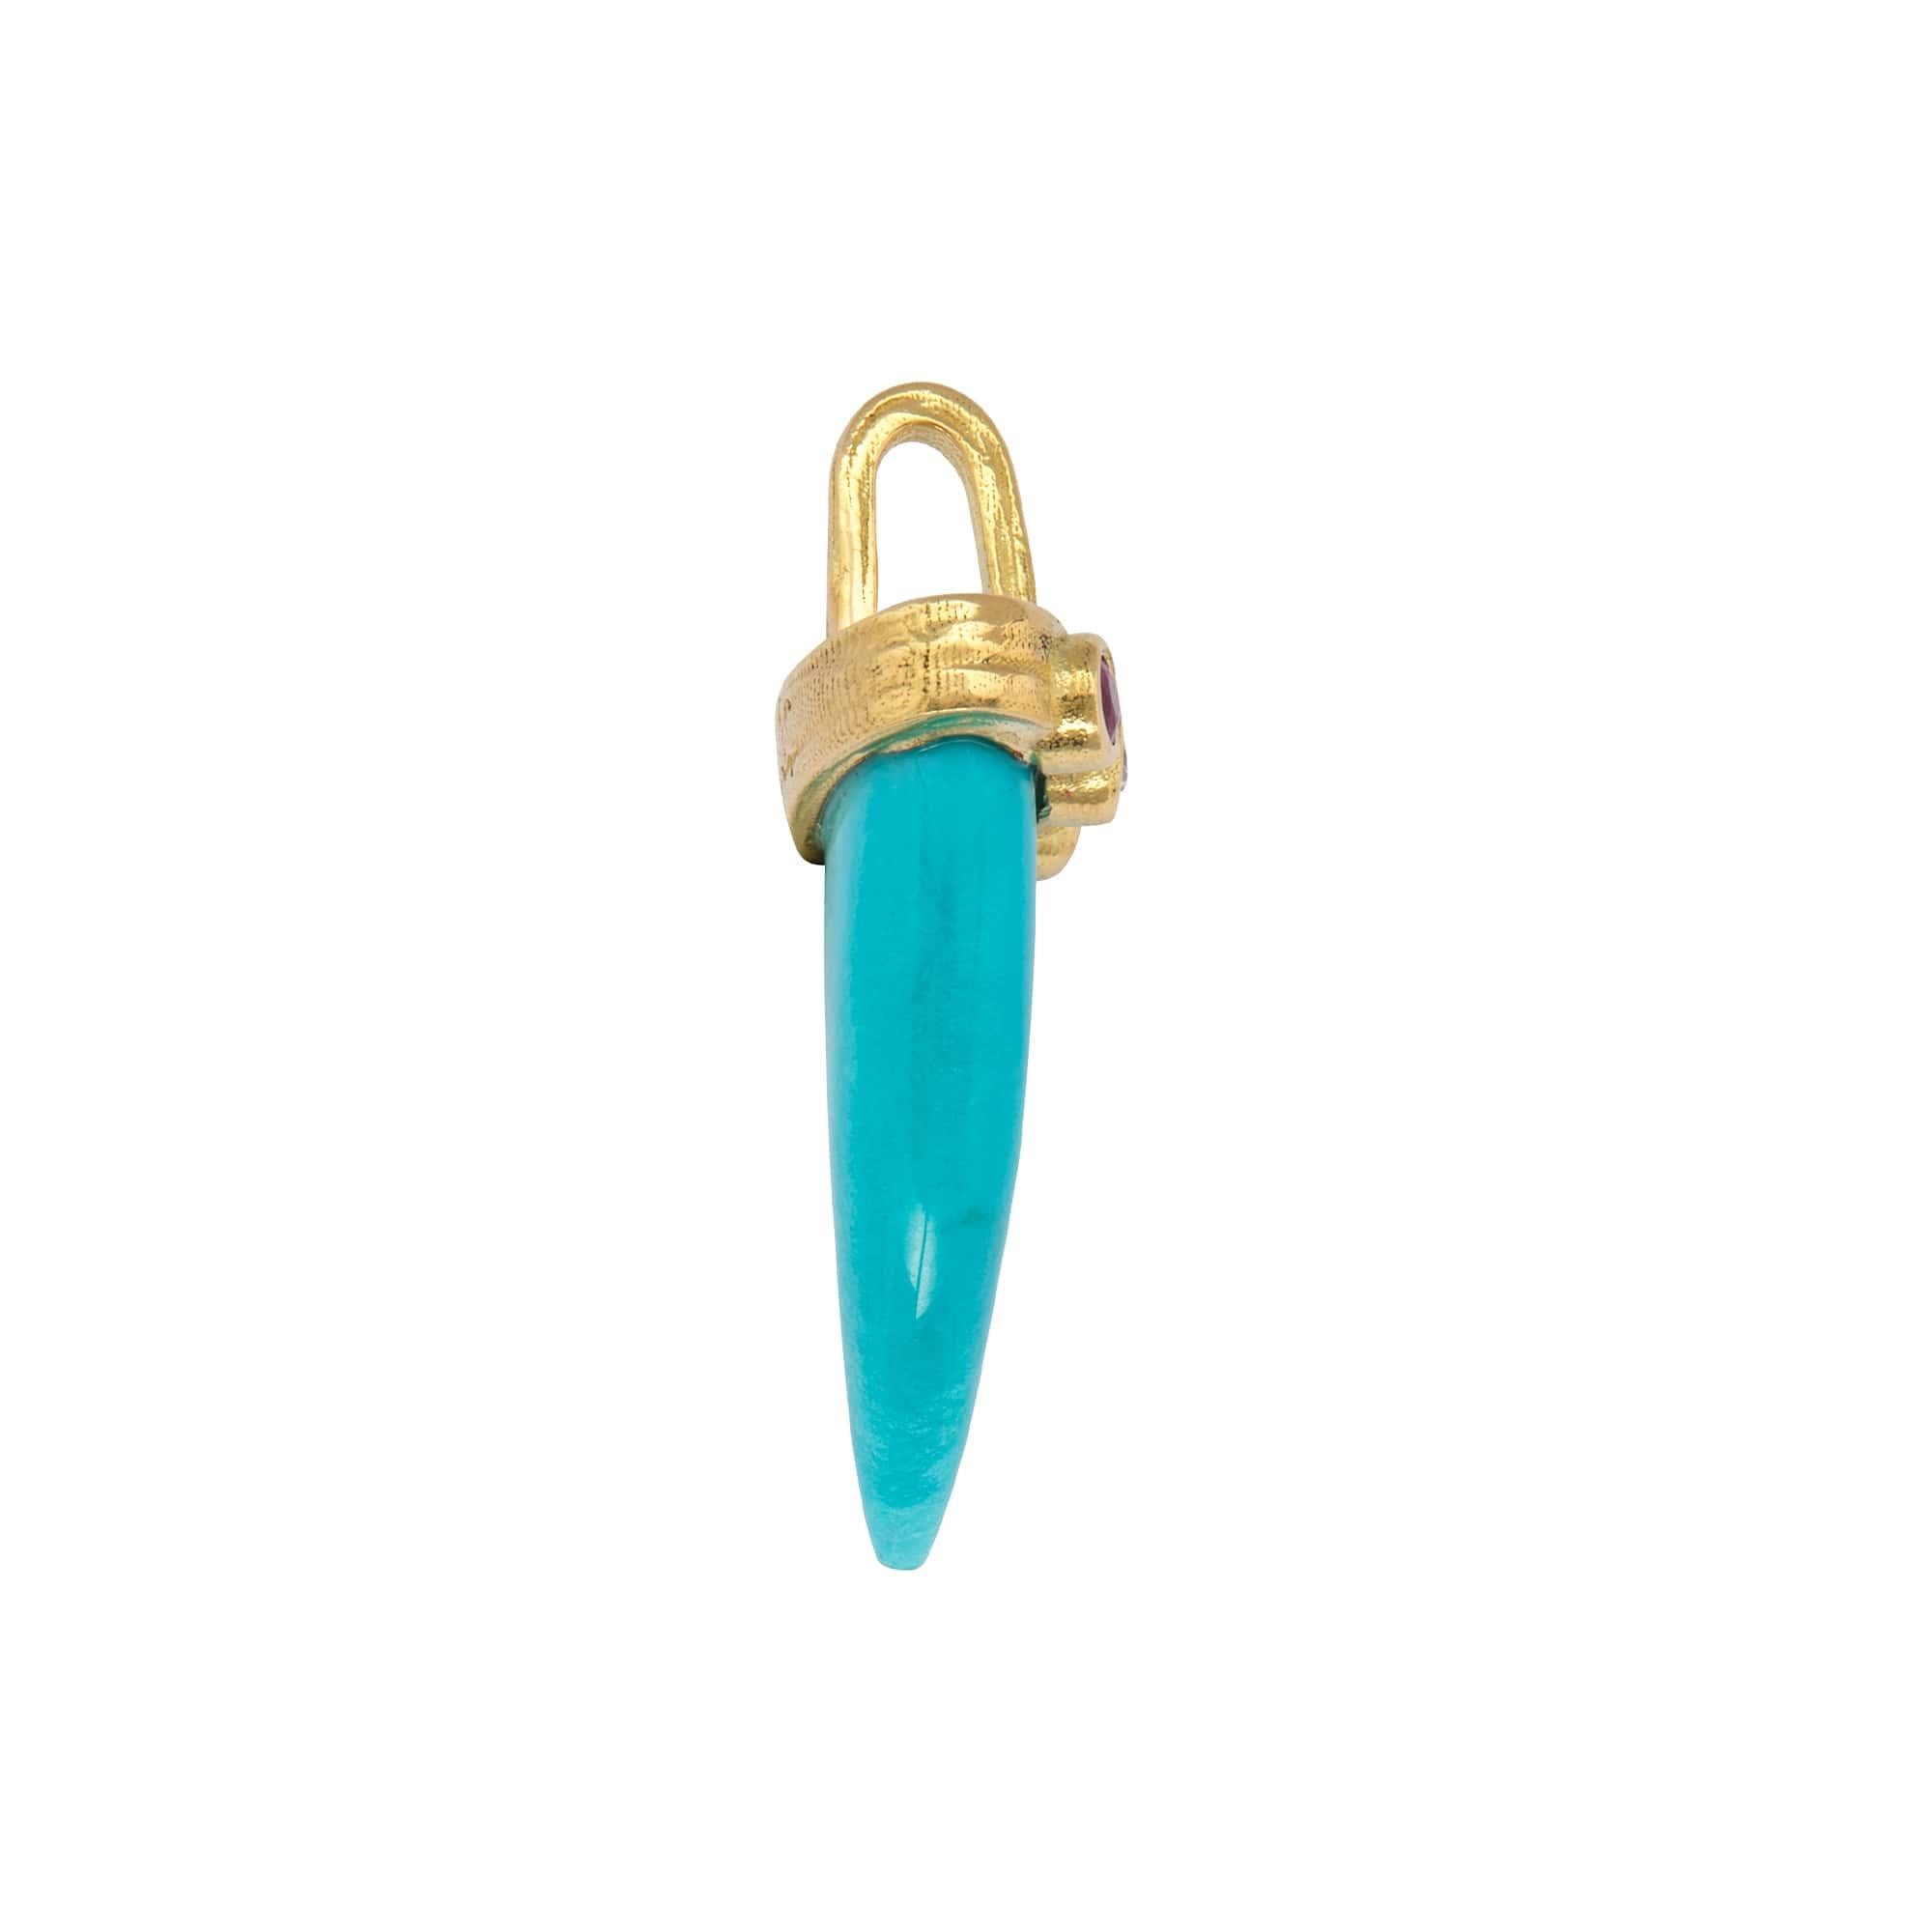 Two faceted rubies and one colorless round brilliant diamond, bezel-set on the front of a weathered 18k yellow gold cap, to embellish a carved American Sleeping Beauty Turquoise horn-shaped talisman for prosperity. This amulet is sold separately,